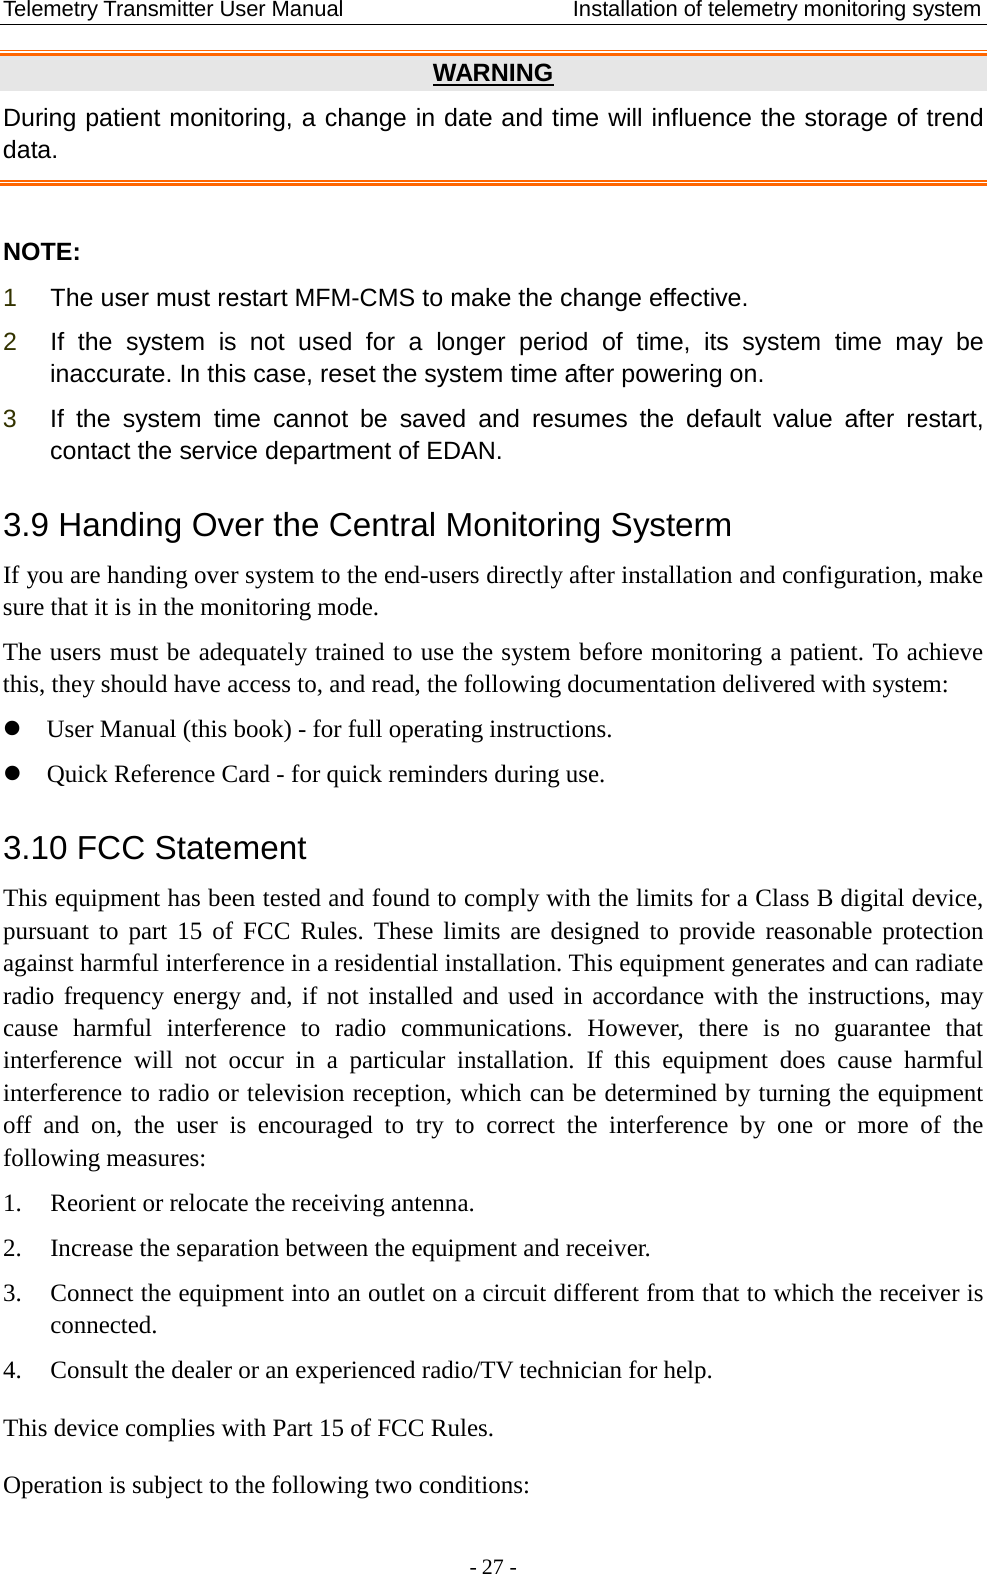 Telemetry Transmitter User Manual                     Installation of telemetry monitoring system WARNING During patient monitoring, a change in date and time will influence the storage of trend data.  NOTE: 1  The user must restart MFM-CMS to make the change effective. 2  If the system  is not used for a longer period of time, its system time may be inaccurate. In this case, reset the system time after powering on. 3  If the system time cannot be saved and resumes the default value after restart, contact the service department of EDAN. 3.9 Handing Over the Central Monitoring Systerm If you are handing over system to the end-users directly after installation and configuration, make sure that it is in the monitoring mode. The users must be adequately trained to use the system before monitoring a patient. To achieve this, they should have access to, and read, the following documentation delivered with system:  User Manual (this book) - for full operating instructions.  Quick Reference Card - for quick reminders during use. 3.10 FCC Statement This equipment has been tested and found to comply with the limits for a Class B digital device, pursuant to part 15 of FCC Rules. These limits are designed to provide reasonable protection against harmful interference in a residential installation. This equipment generates and can radiate radio frequency energy and, if not installed and used in accordance with the instructions, may cause harmful interference to radio communications. However, there is no guarantee that interference will not occur in a particular installation. If this equipment does cause harmful interference to radio or television reception, which can be determined by turning the equipment off and on, the user is encouraged to try to correct  the interference by one or more of the following measures: 1. Reorient or relocate the receiving antenna.   2. Increase the separation between the equipment and receiver.   3. Connect the equipment into an outlet on a circuit different from that to which the receiver is connected. 4. Consult the dealer or an experienced radio/TV technician for help. This device complies with Part 15 of FCC Rules. Operation is subject to the following two conditions:  - 27 - 